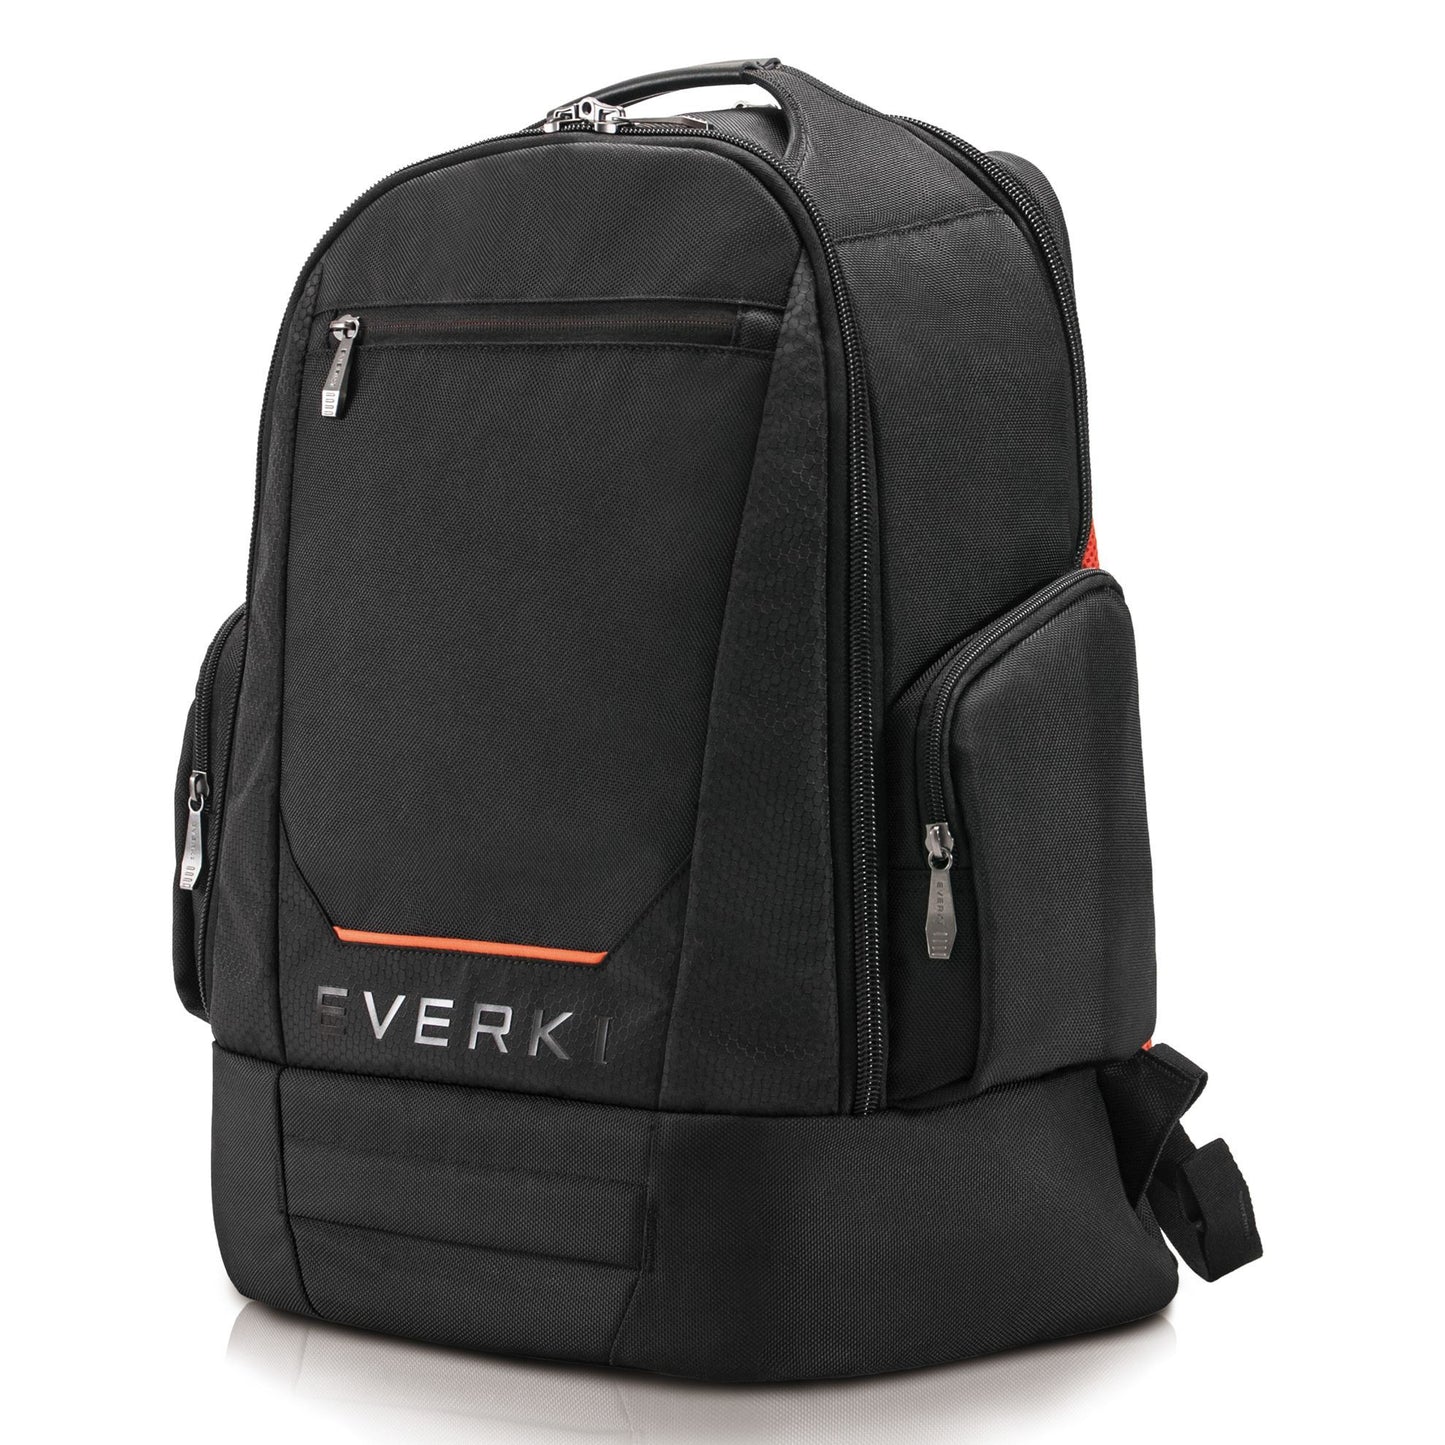 EVERKI ContemPRO Laptop Backpack Designed To Fit Up To 18.4"